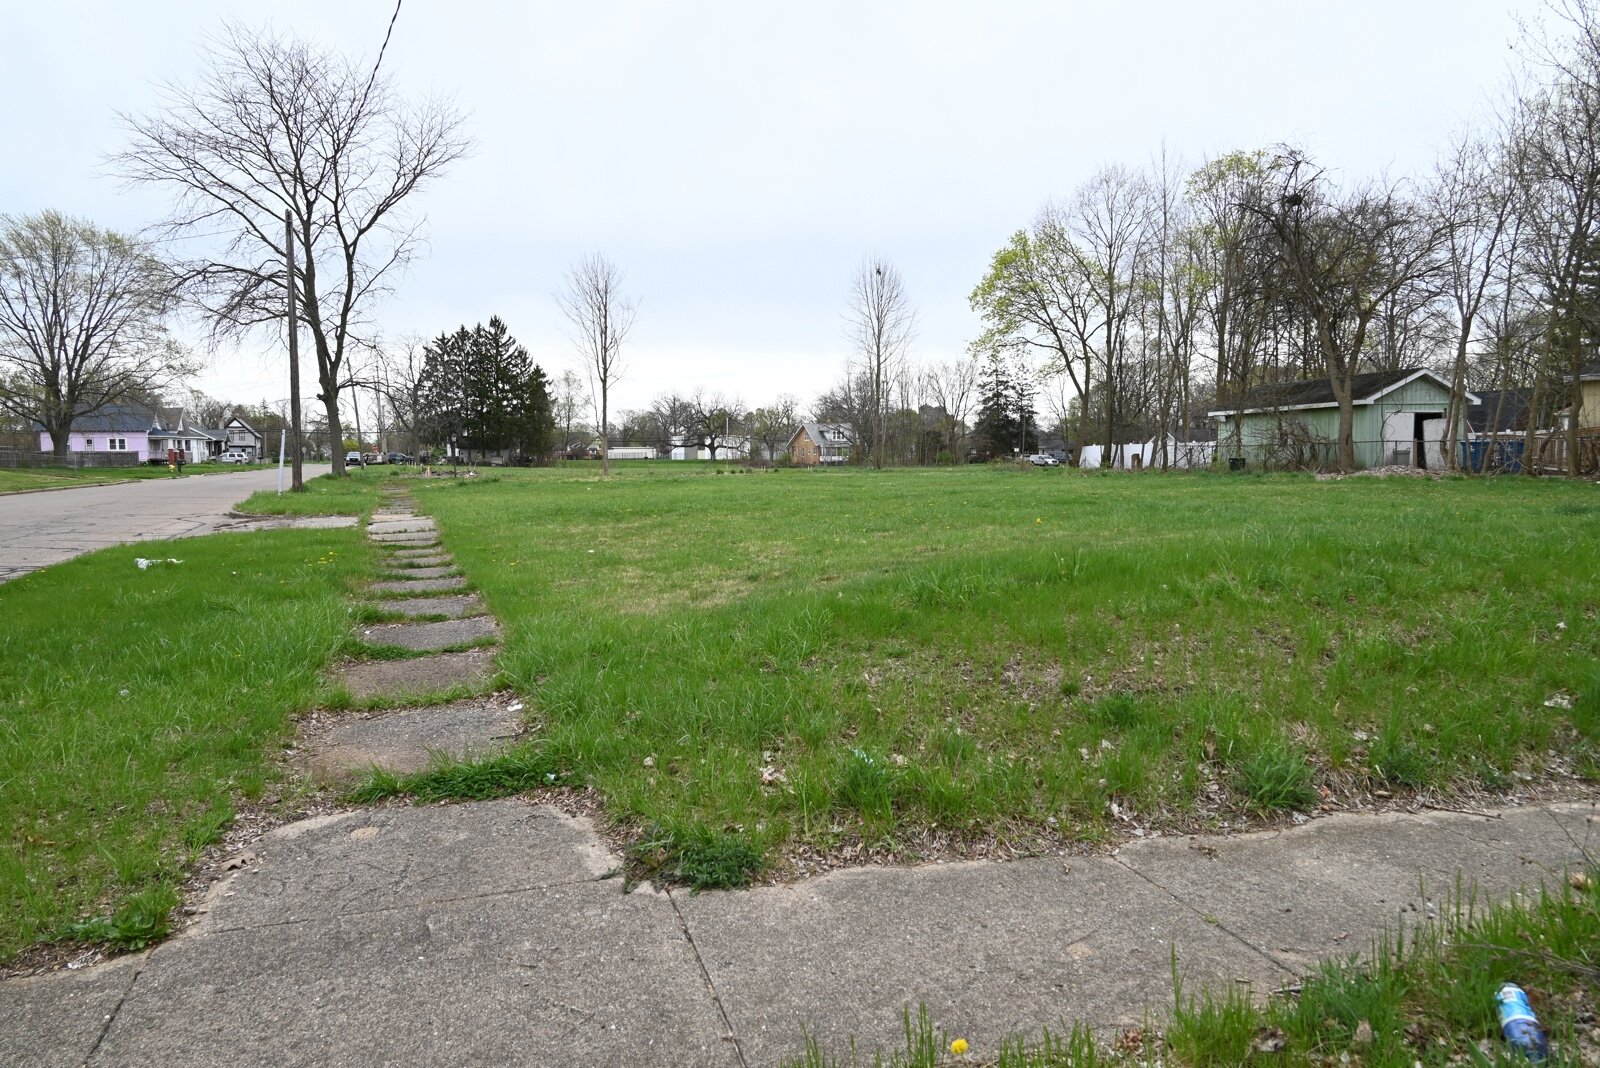 Washington Heights United Methodist Church plans to develop vacant land in a block west of the church. The block is bordered by Hubbard Road, Greenwood Avenue, Jordan Street, and Moffitt Place.